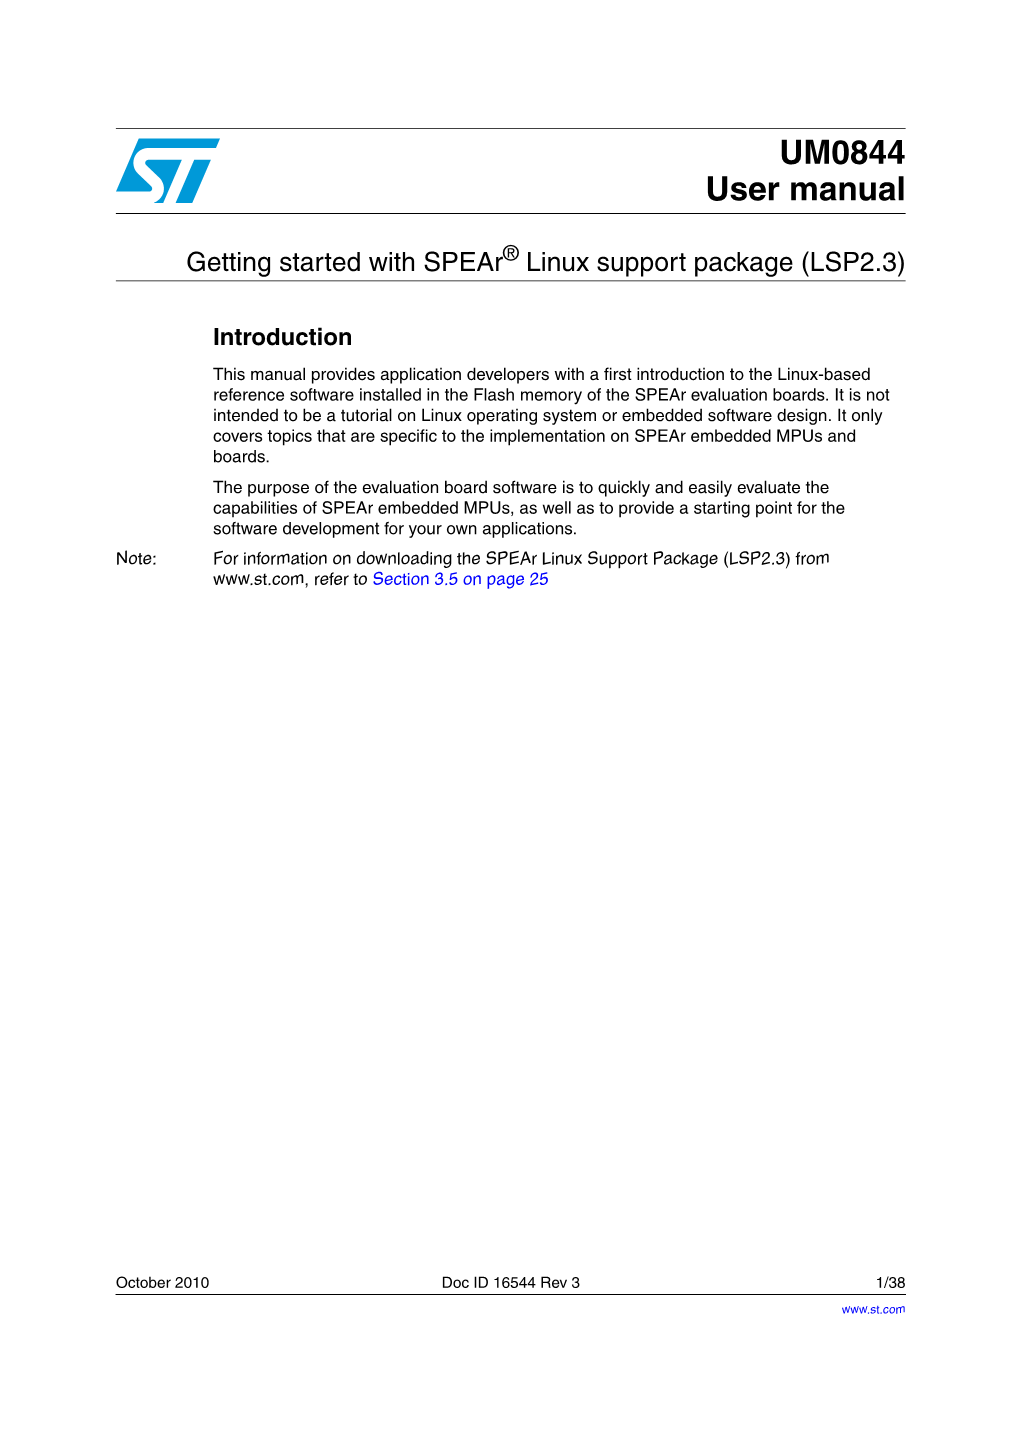 Getting Started with Spear® Linux Support Package (LSP2.3)